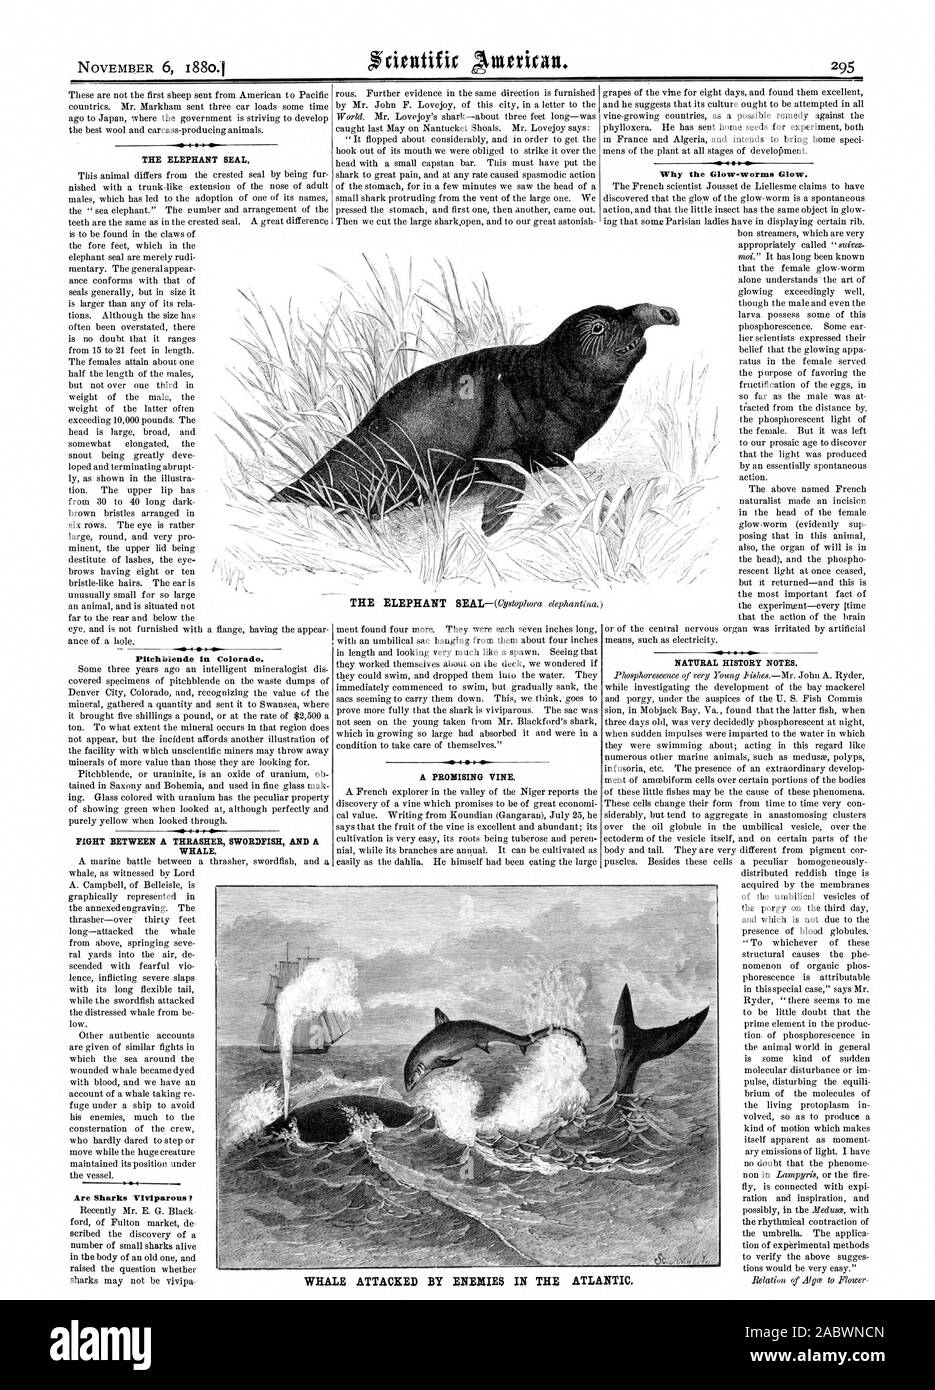 THE ELEPHANT SEAL. Pitchblende in Colorad WHALE. Why the Glow-worms Glow. NATURAL HISTORY NOTES. WHALE ATTACKED BY ENEMIES IN THE ATLANTIC. I Are Sharks Viviparous?, scientific american, 1880-11-06 Stock Photo